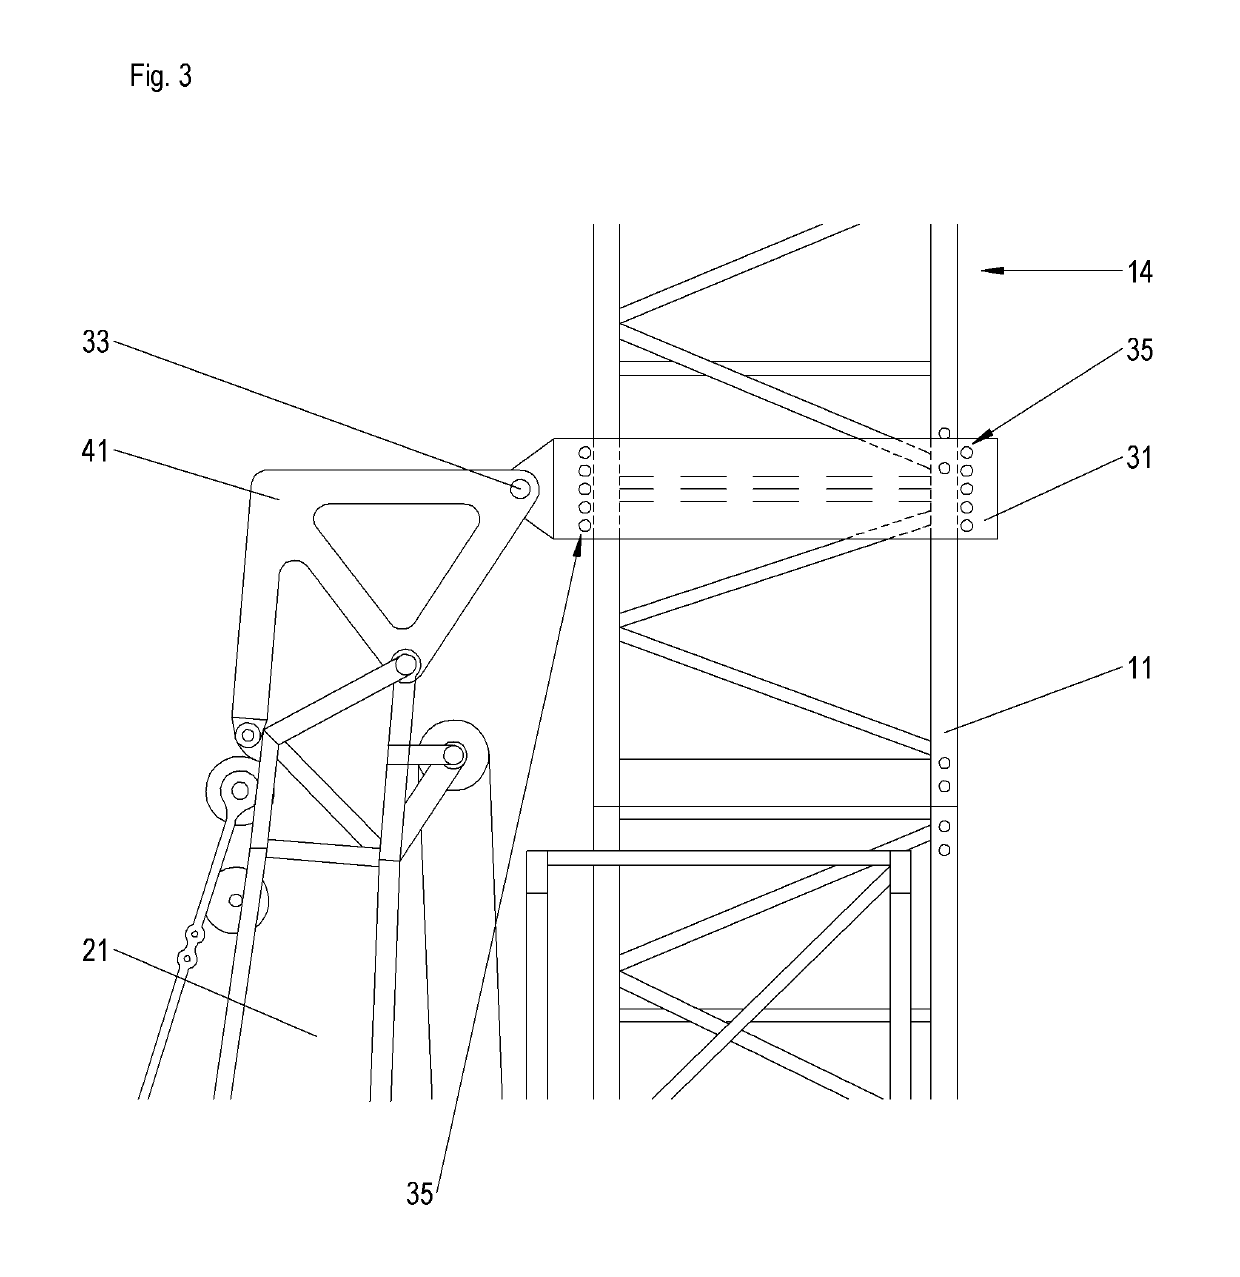 Method for transferring a tower crane and a frame and take-up mechanism therefor